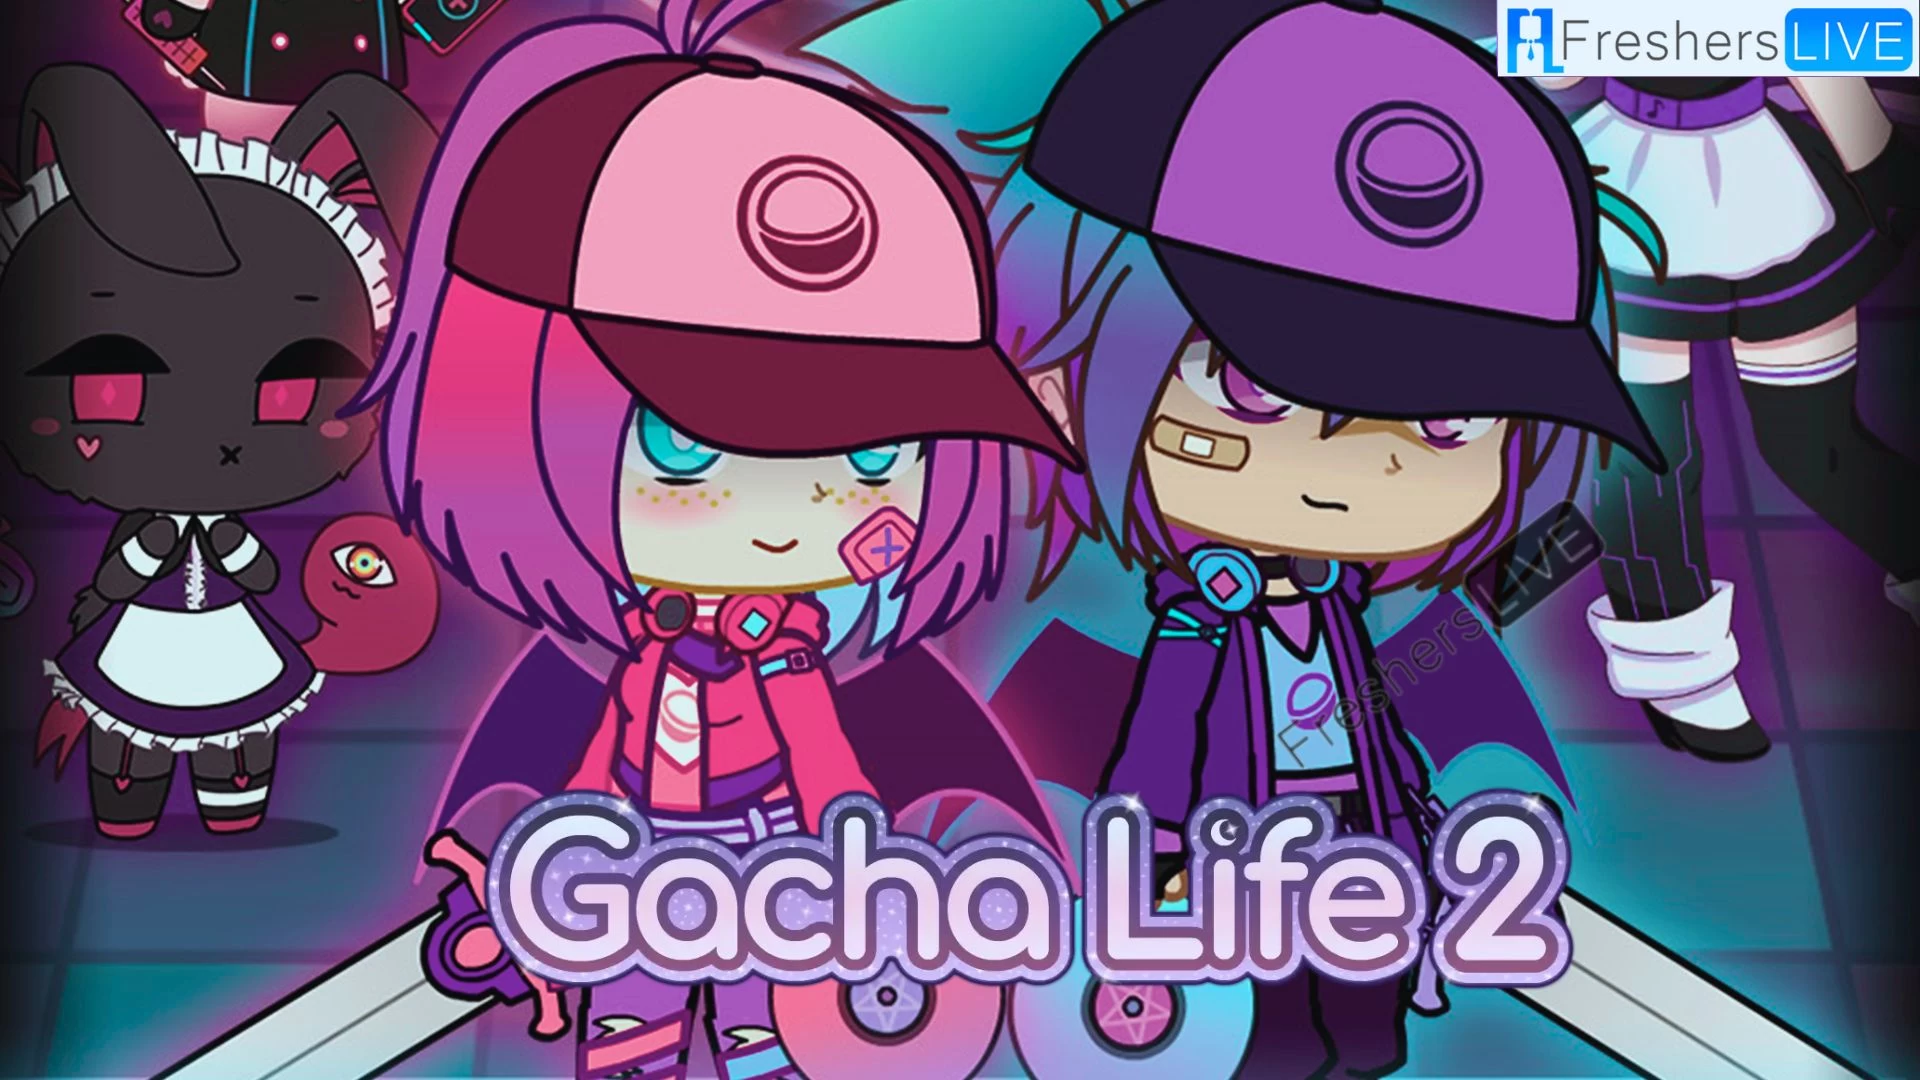 When is Gacha life 2 coming out for Android and iOS? How to get early access to Gacha life 2?